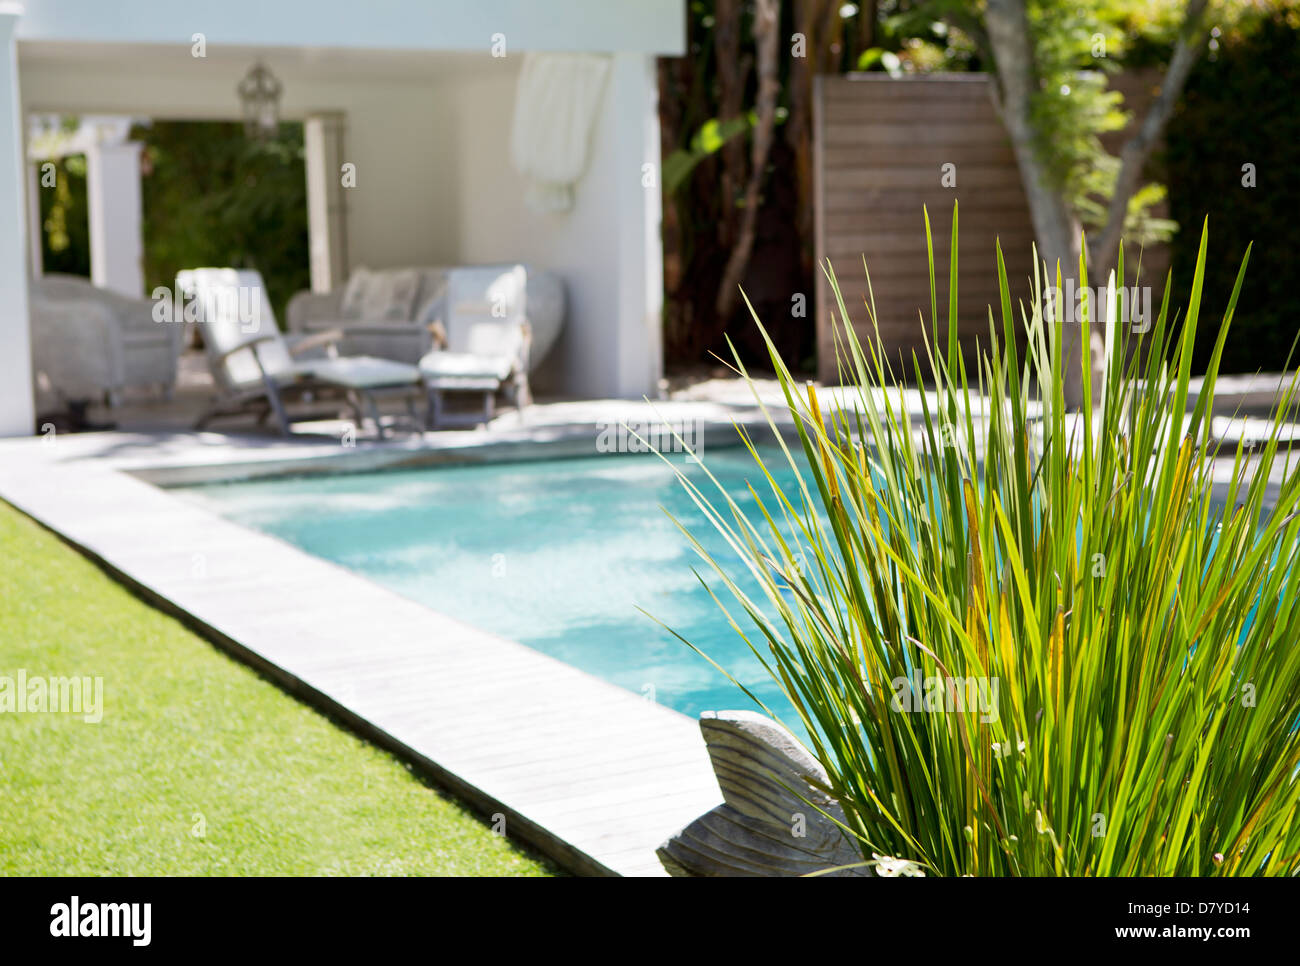 Plant and swimming pool in backyard Stock Photo